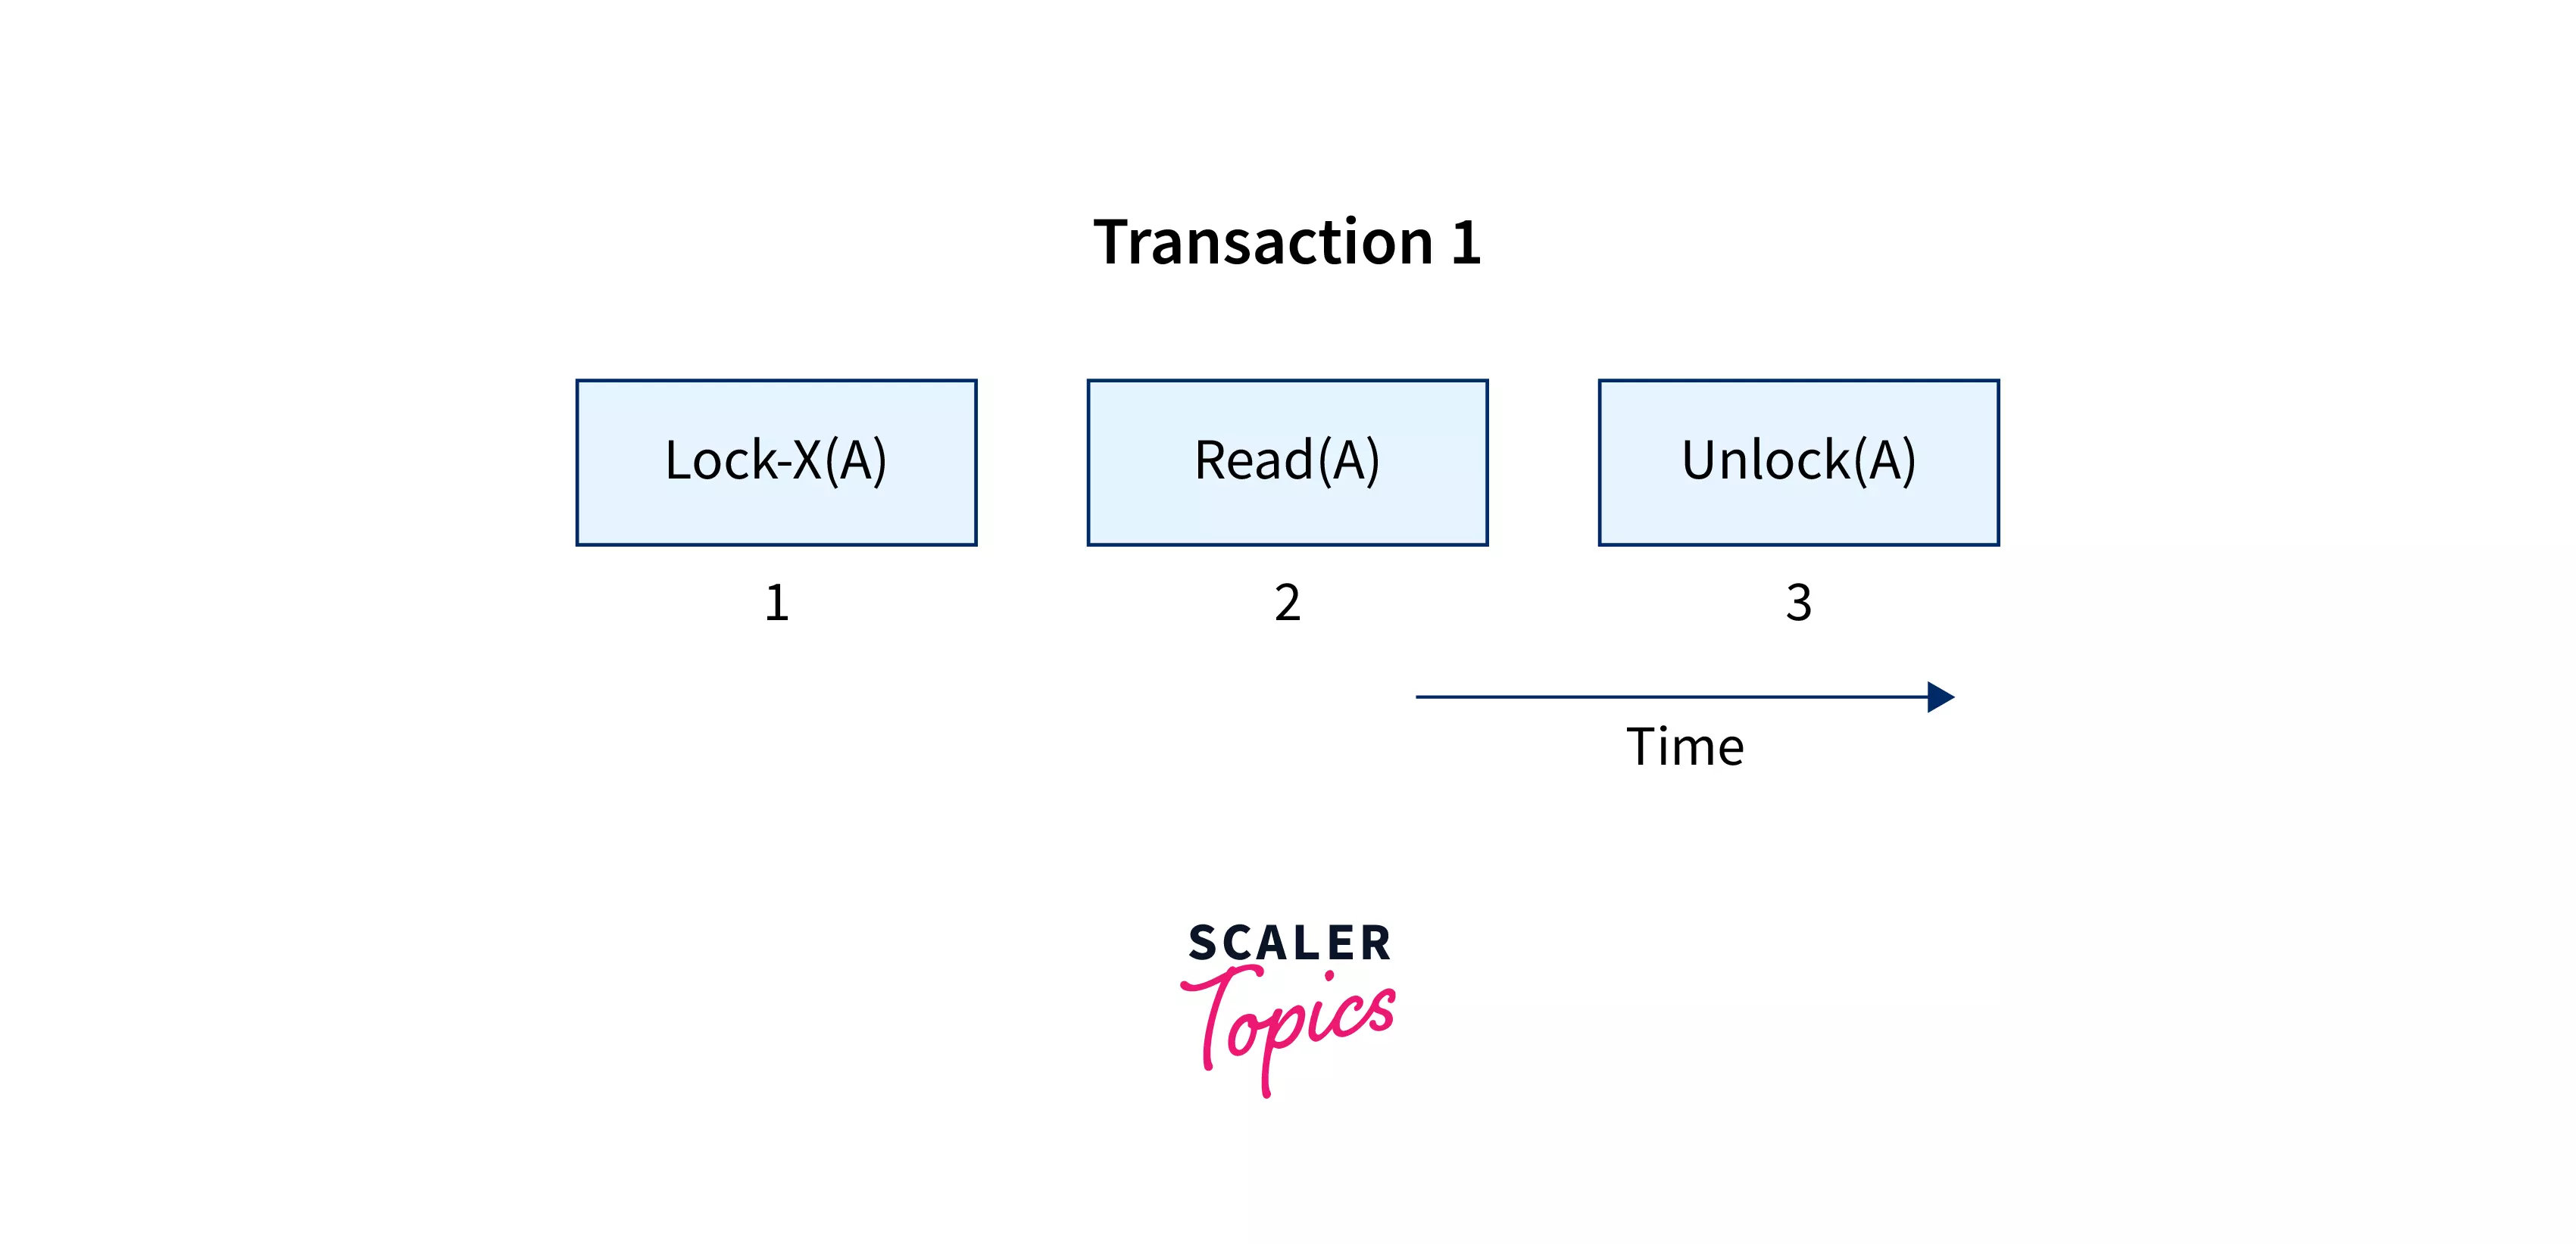 What are two problems of lock based protocols?